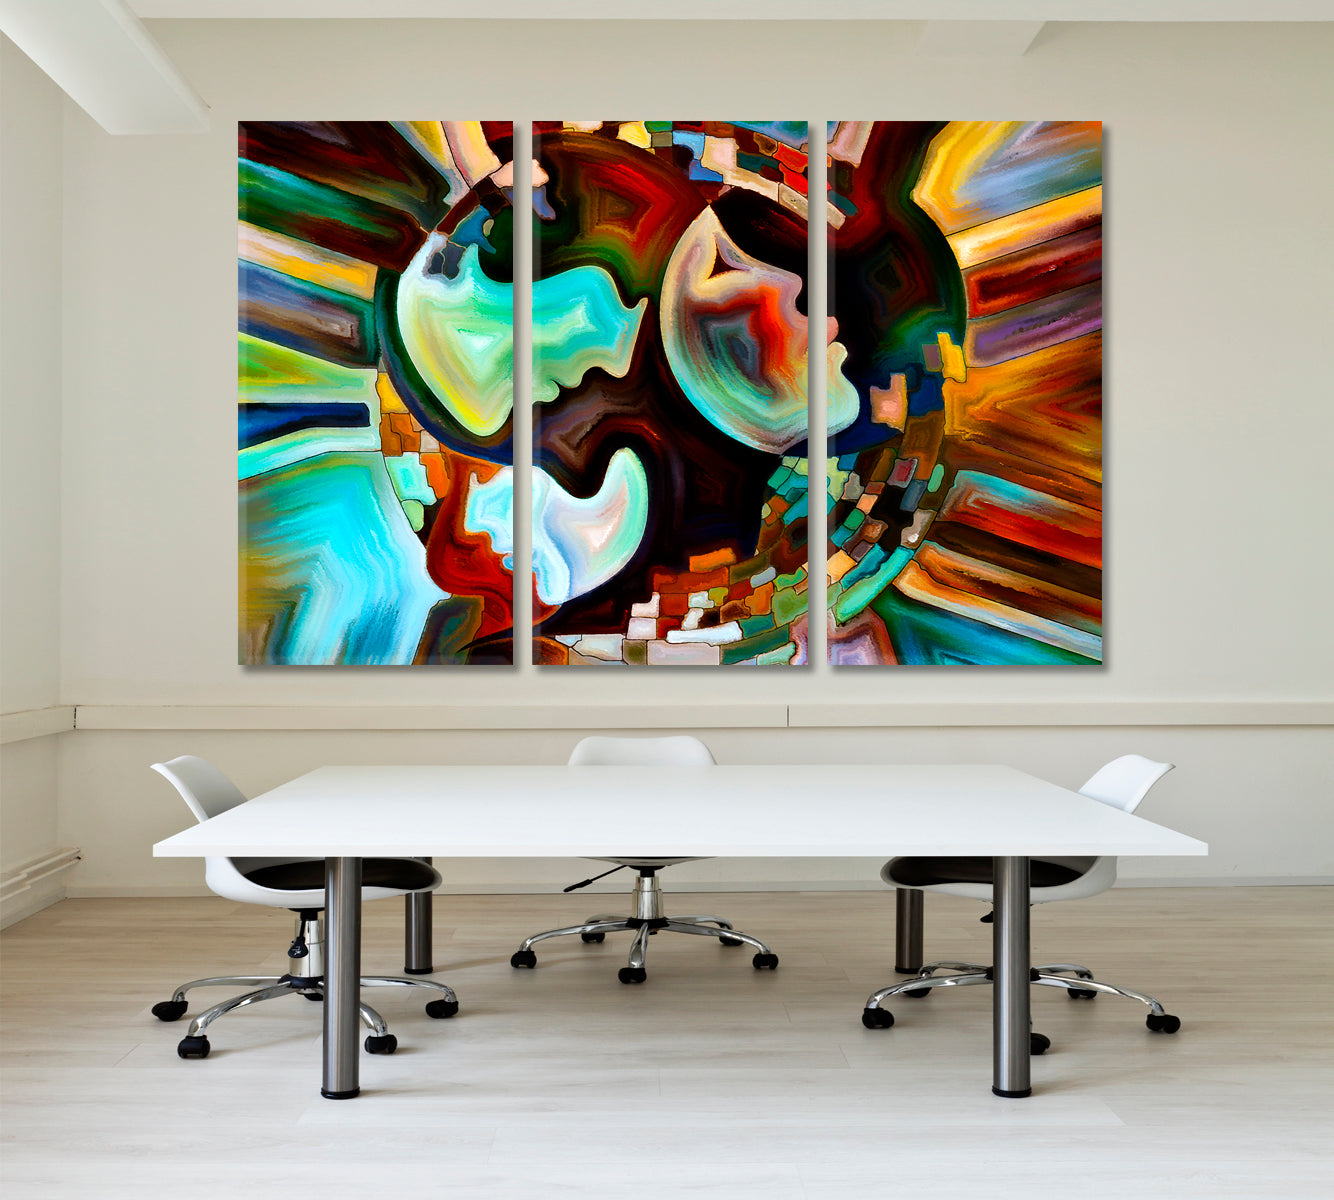 Abstract Design Human And Nature Contemporary Art Artesty 3 panels 36" x 24" 